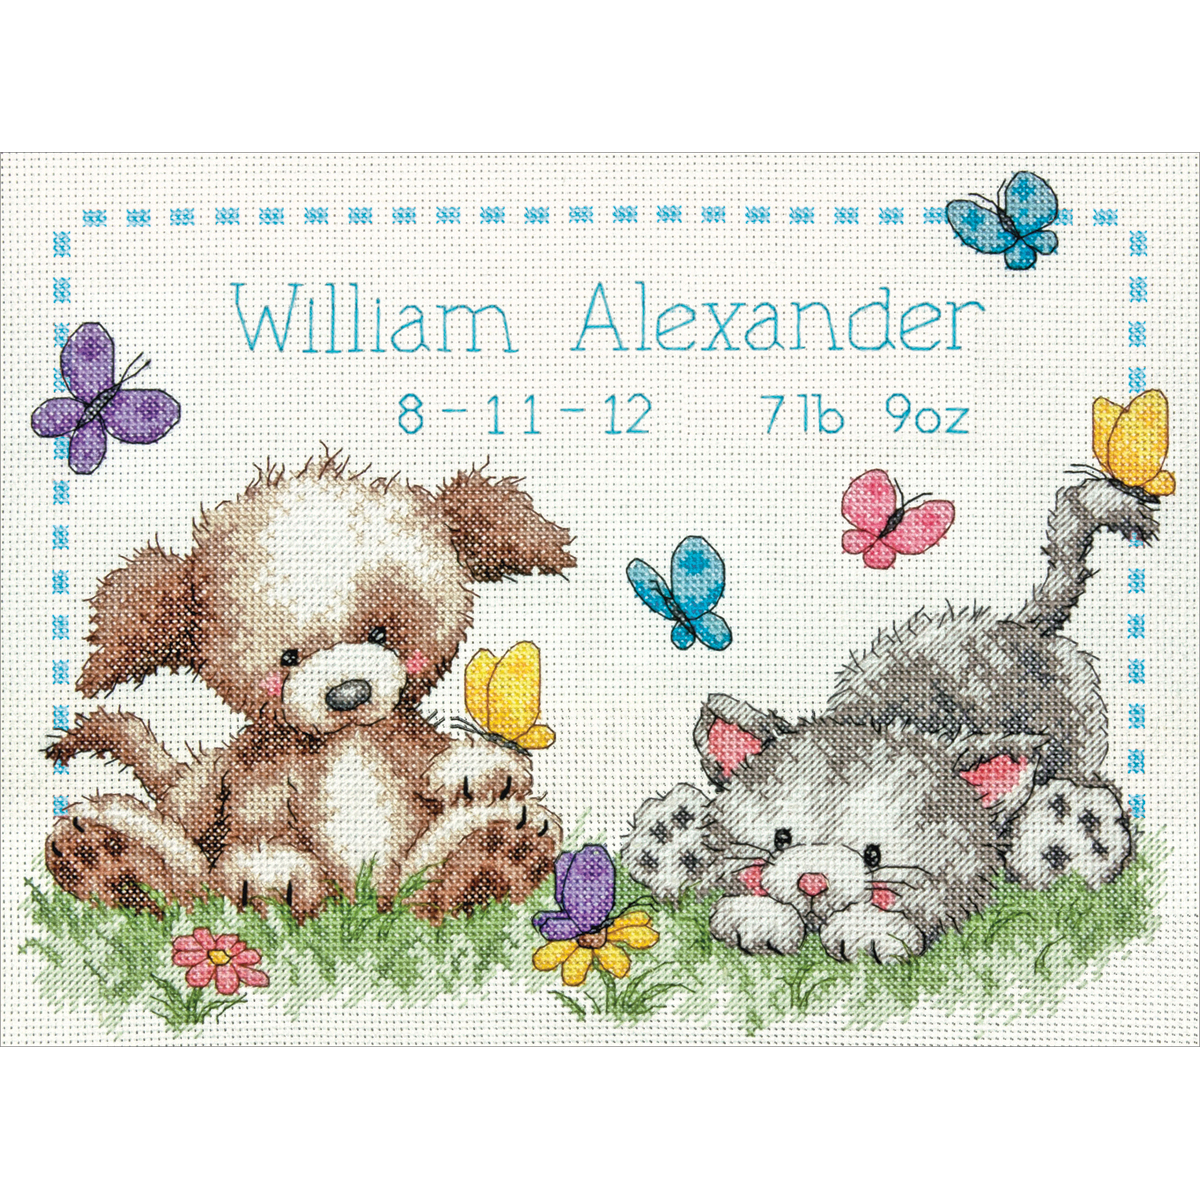 Dimensions Pet Friends Baby Birth Record Counted Cross Stitch Kit 12"X9" 14 Count